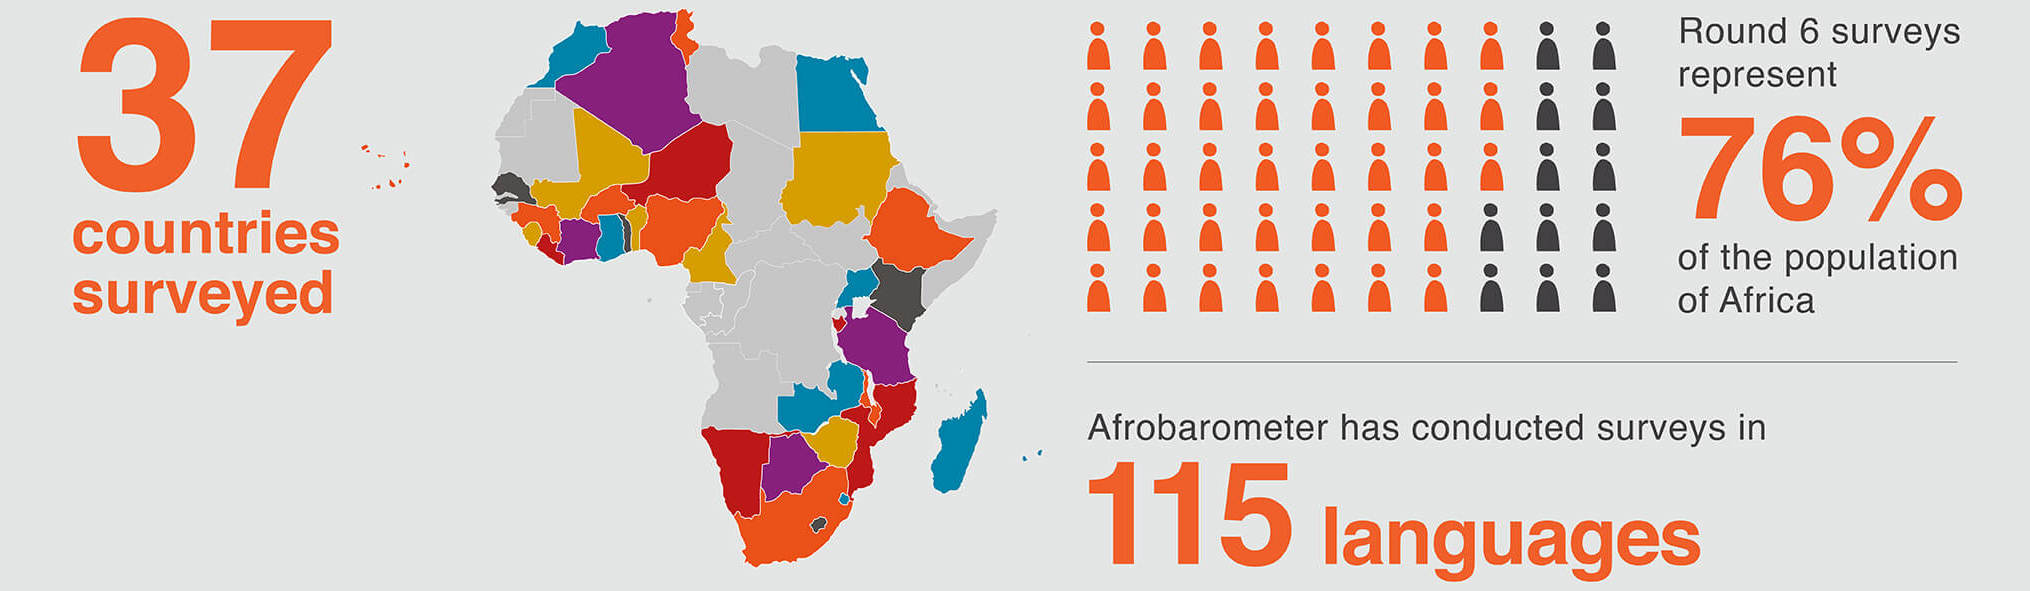 Afrobarometer Survey (round 7) - A Selection of Land-Related Indicators